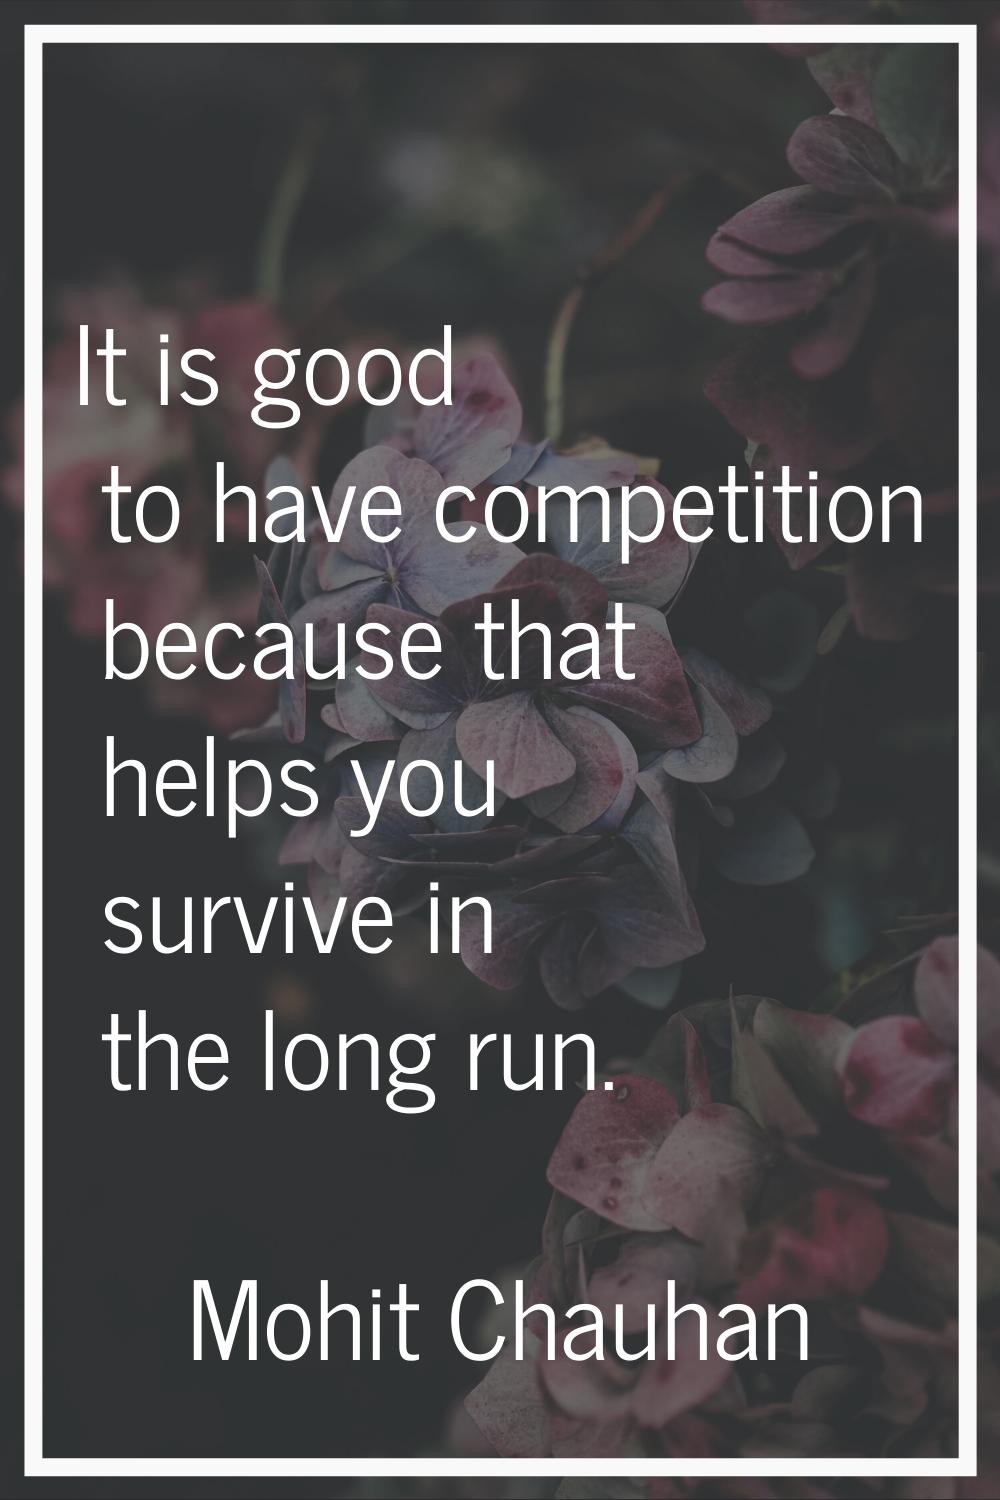 It is good to have competition because that helps you survive in the long run.